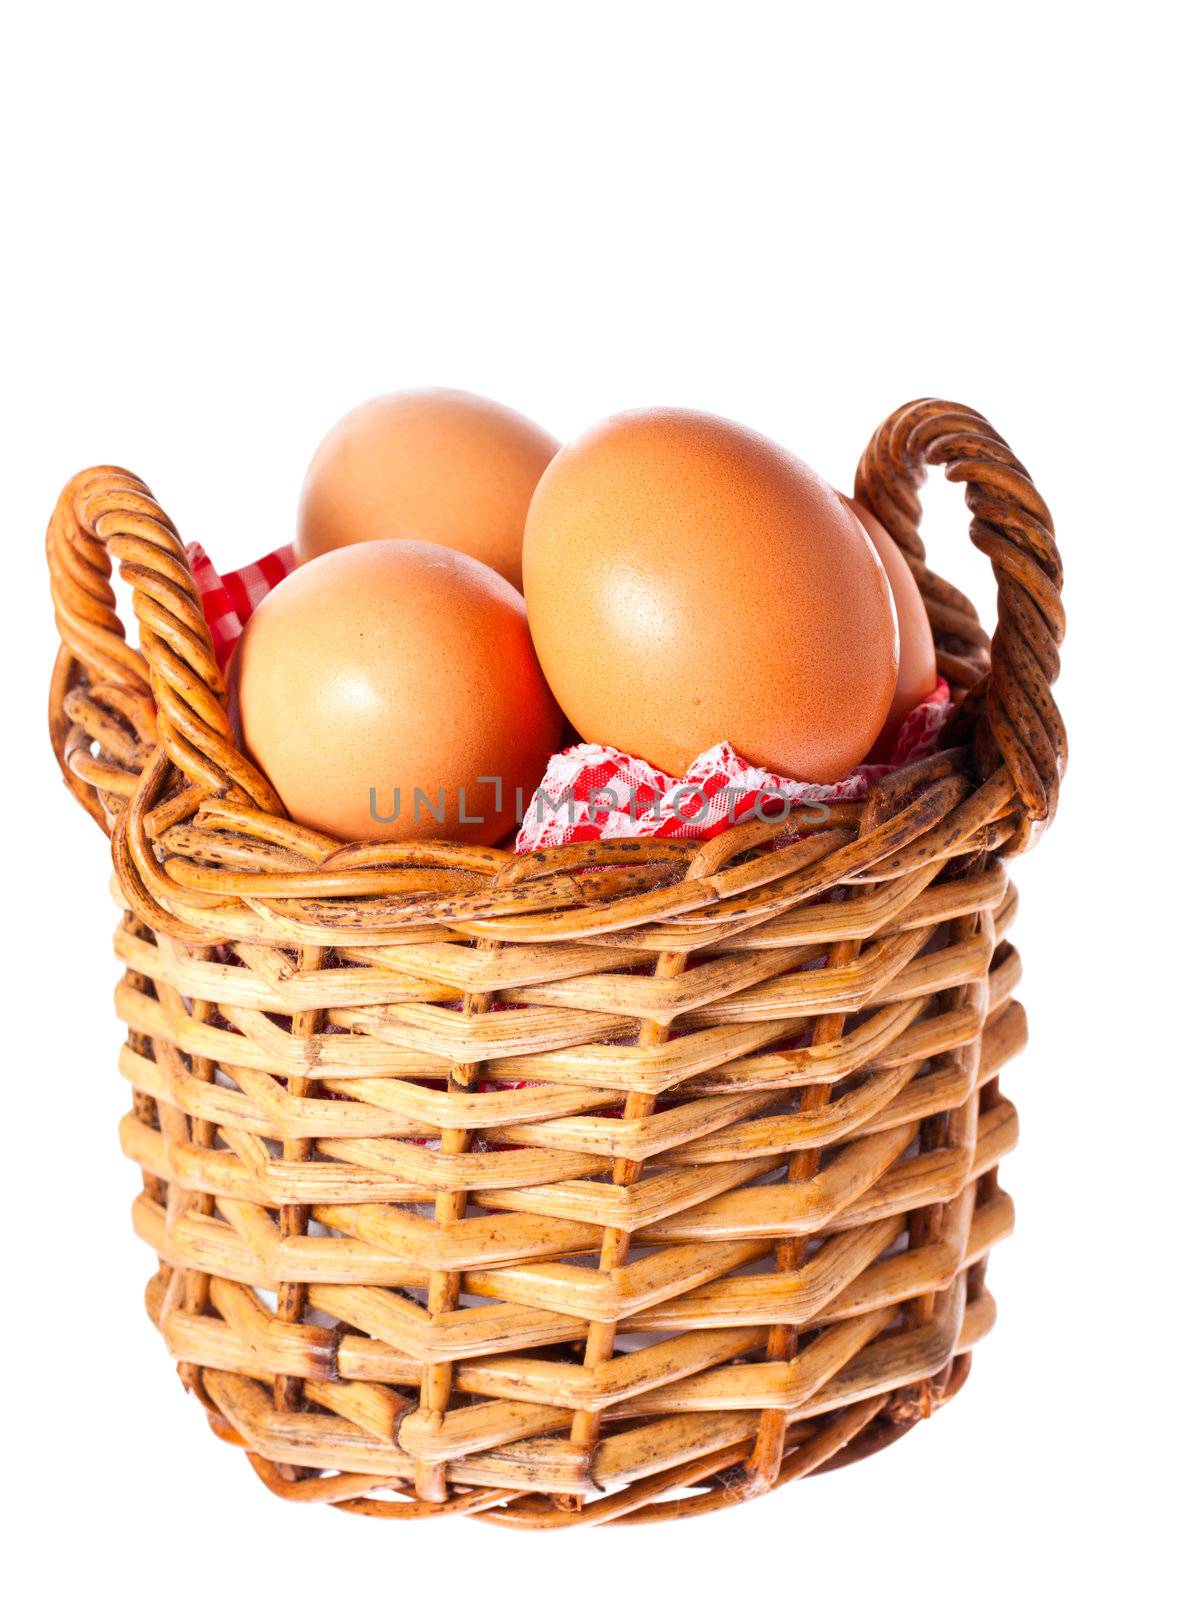 Fresh delicious brown free range chicken eggs in a cane basket with a red checkered cloth. Isolated over white with clipping path.